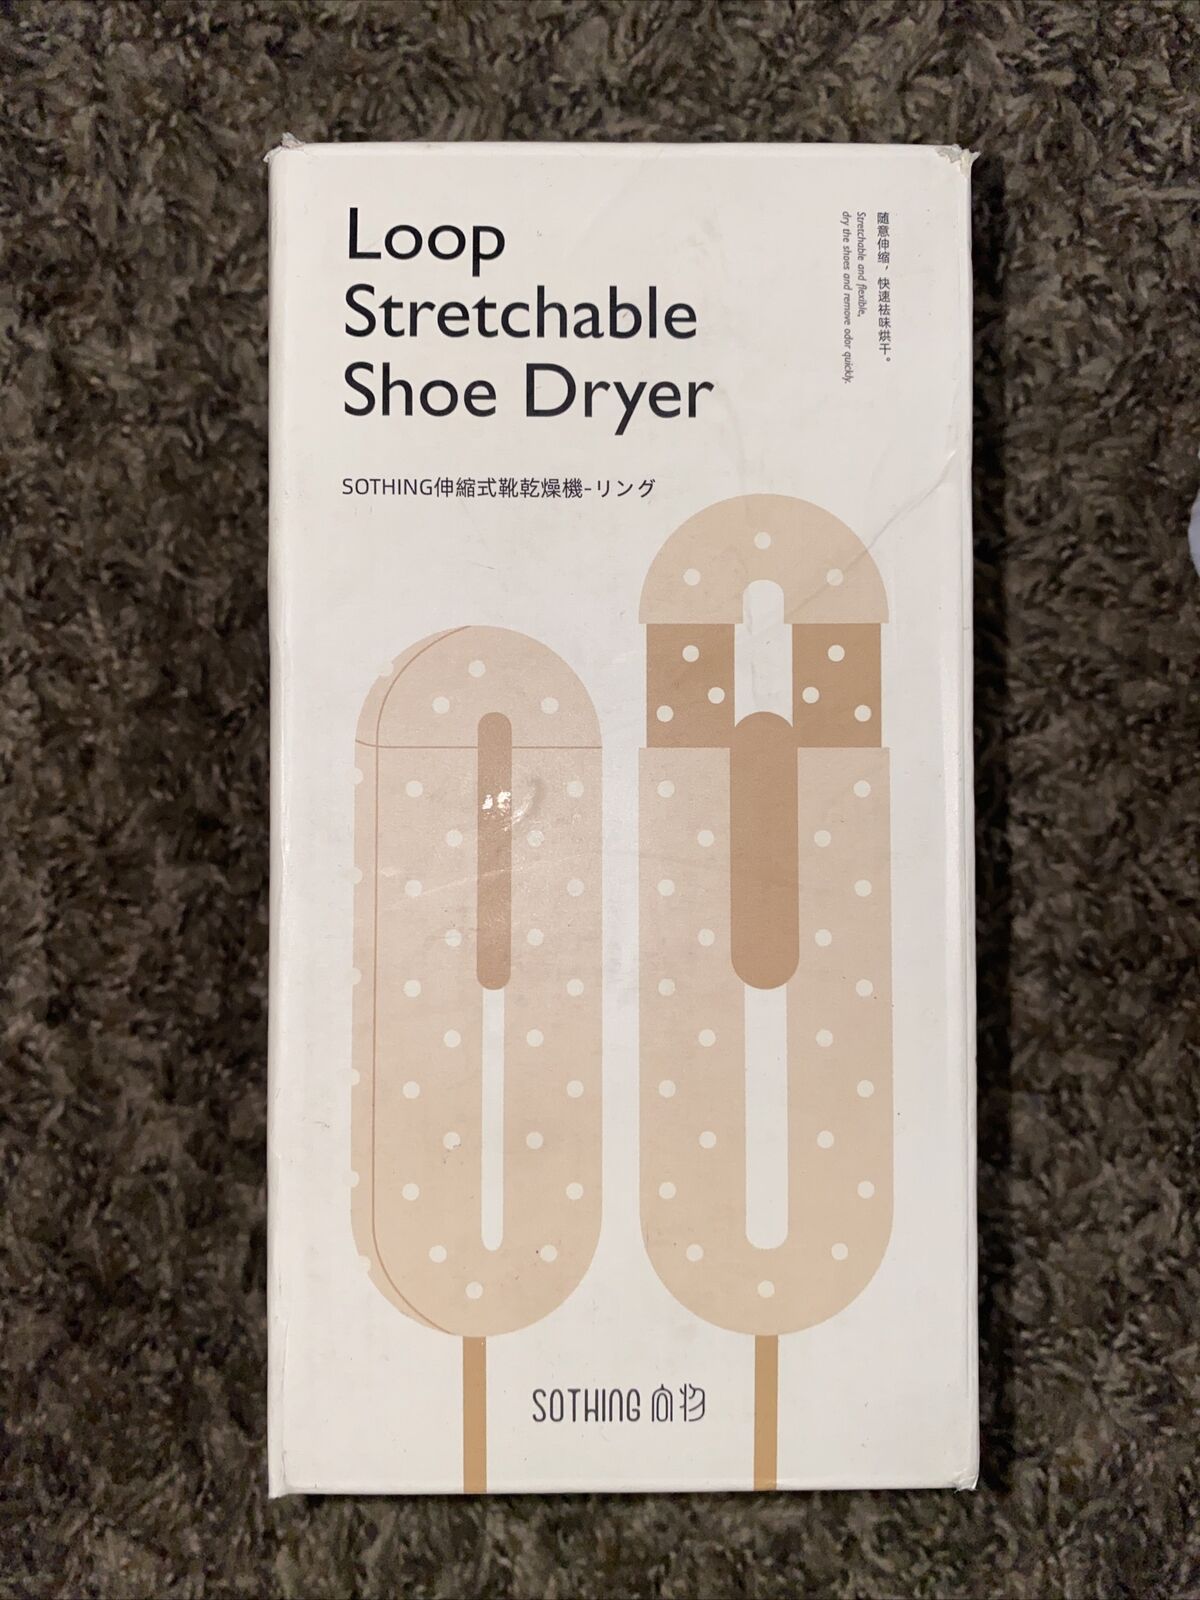 Xiaomi 2021 model Sothing Shoe Dryer Stretchable Shoes Electric Low price Loop